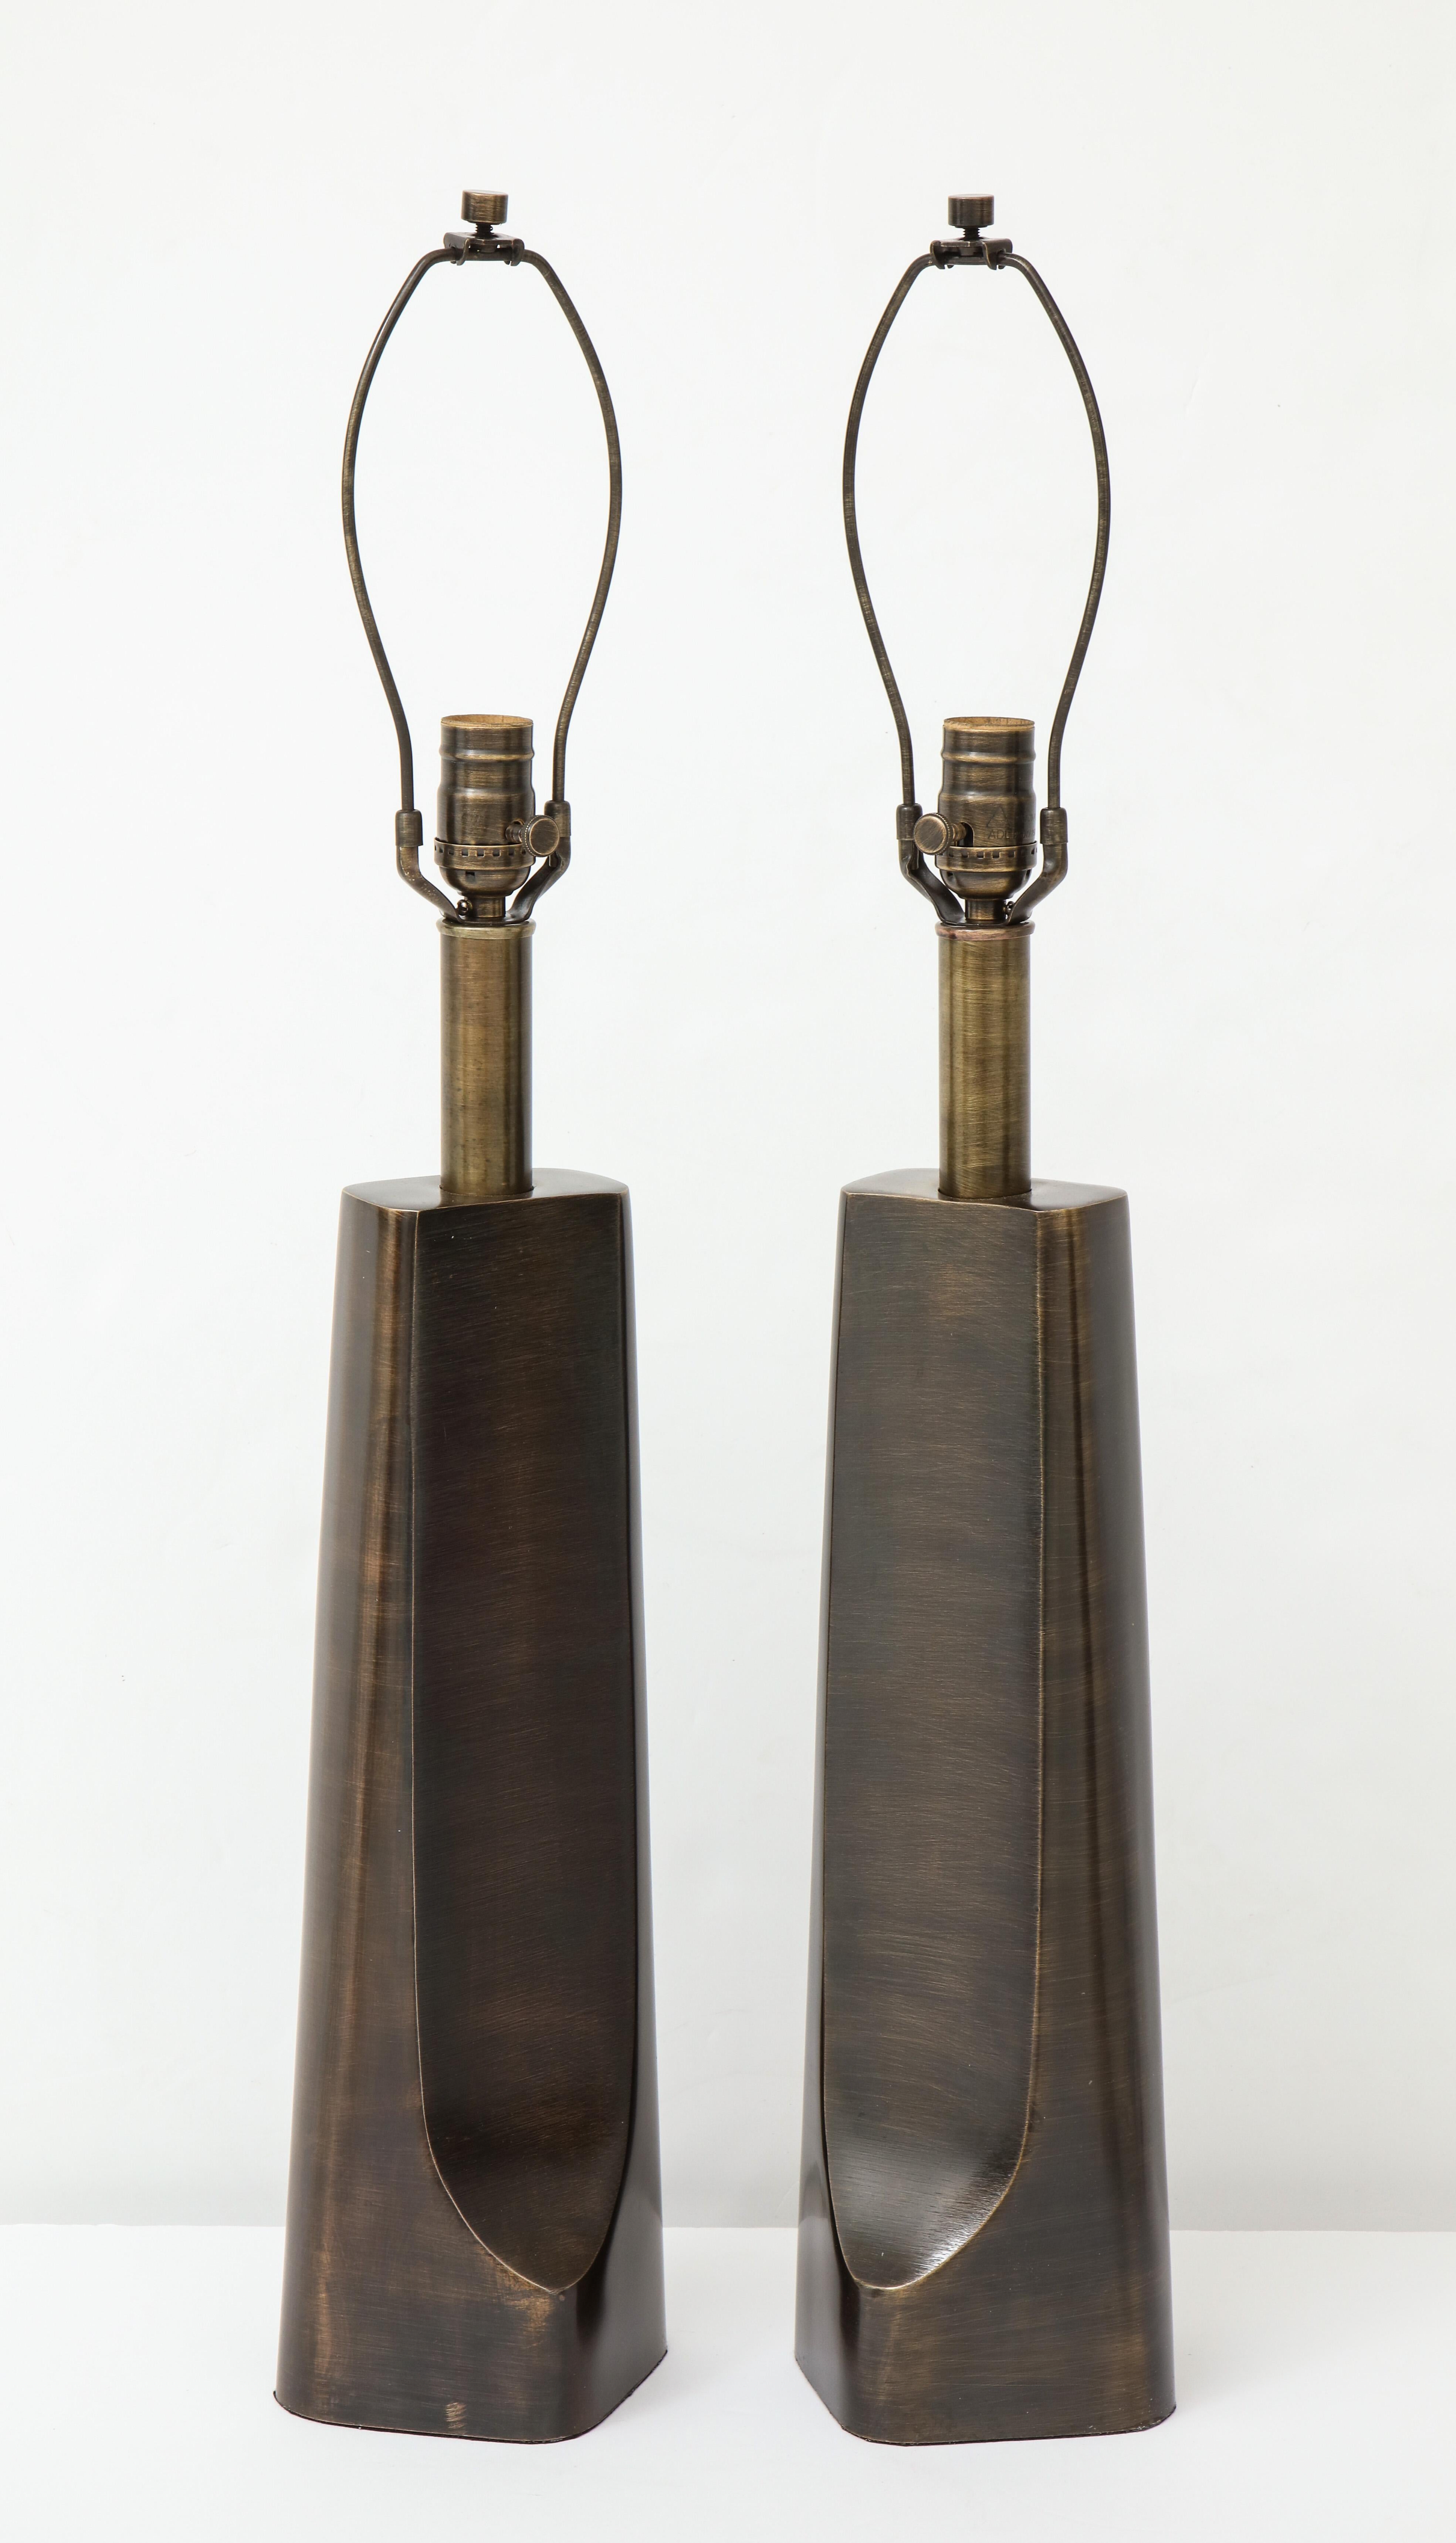 Pair of aged bronze sculptural modernist lamps with a slim profile. Rewired for use in the USA. 100W bulbs max.